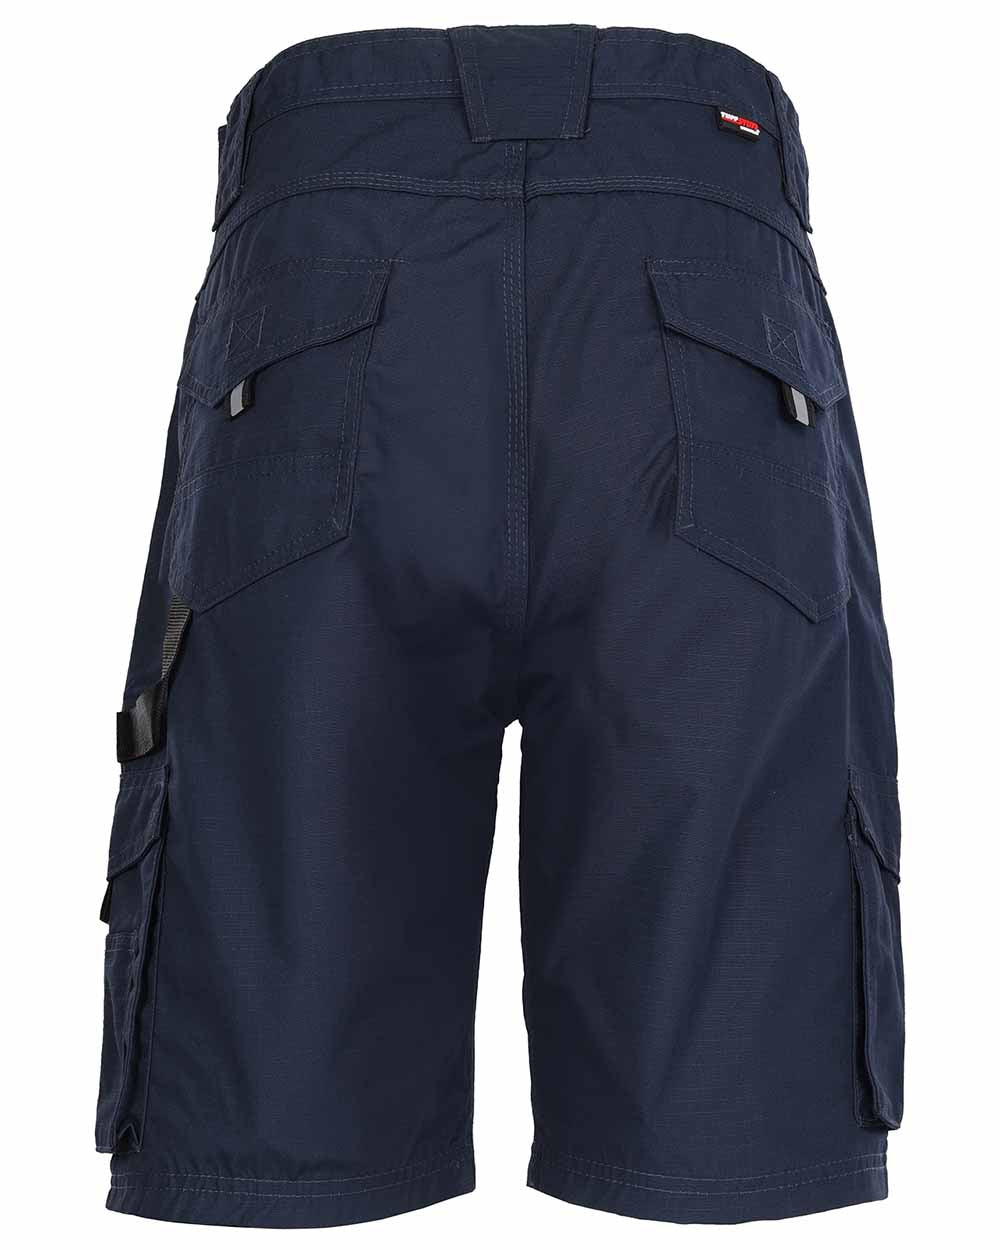 Back view flap closed pockets Tuffstuff Enduro Work Shorts in Navy 